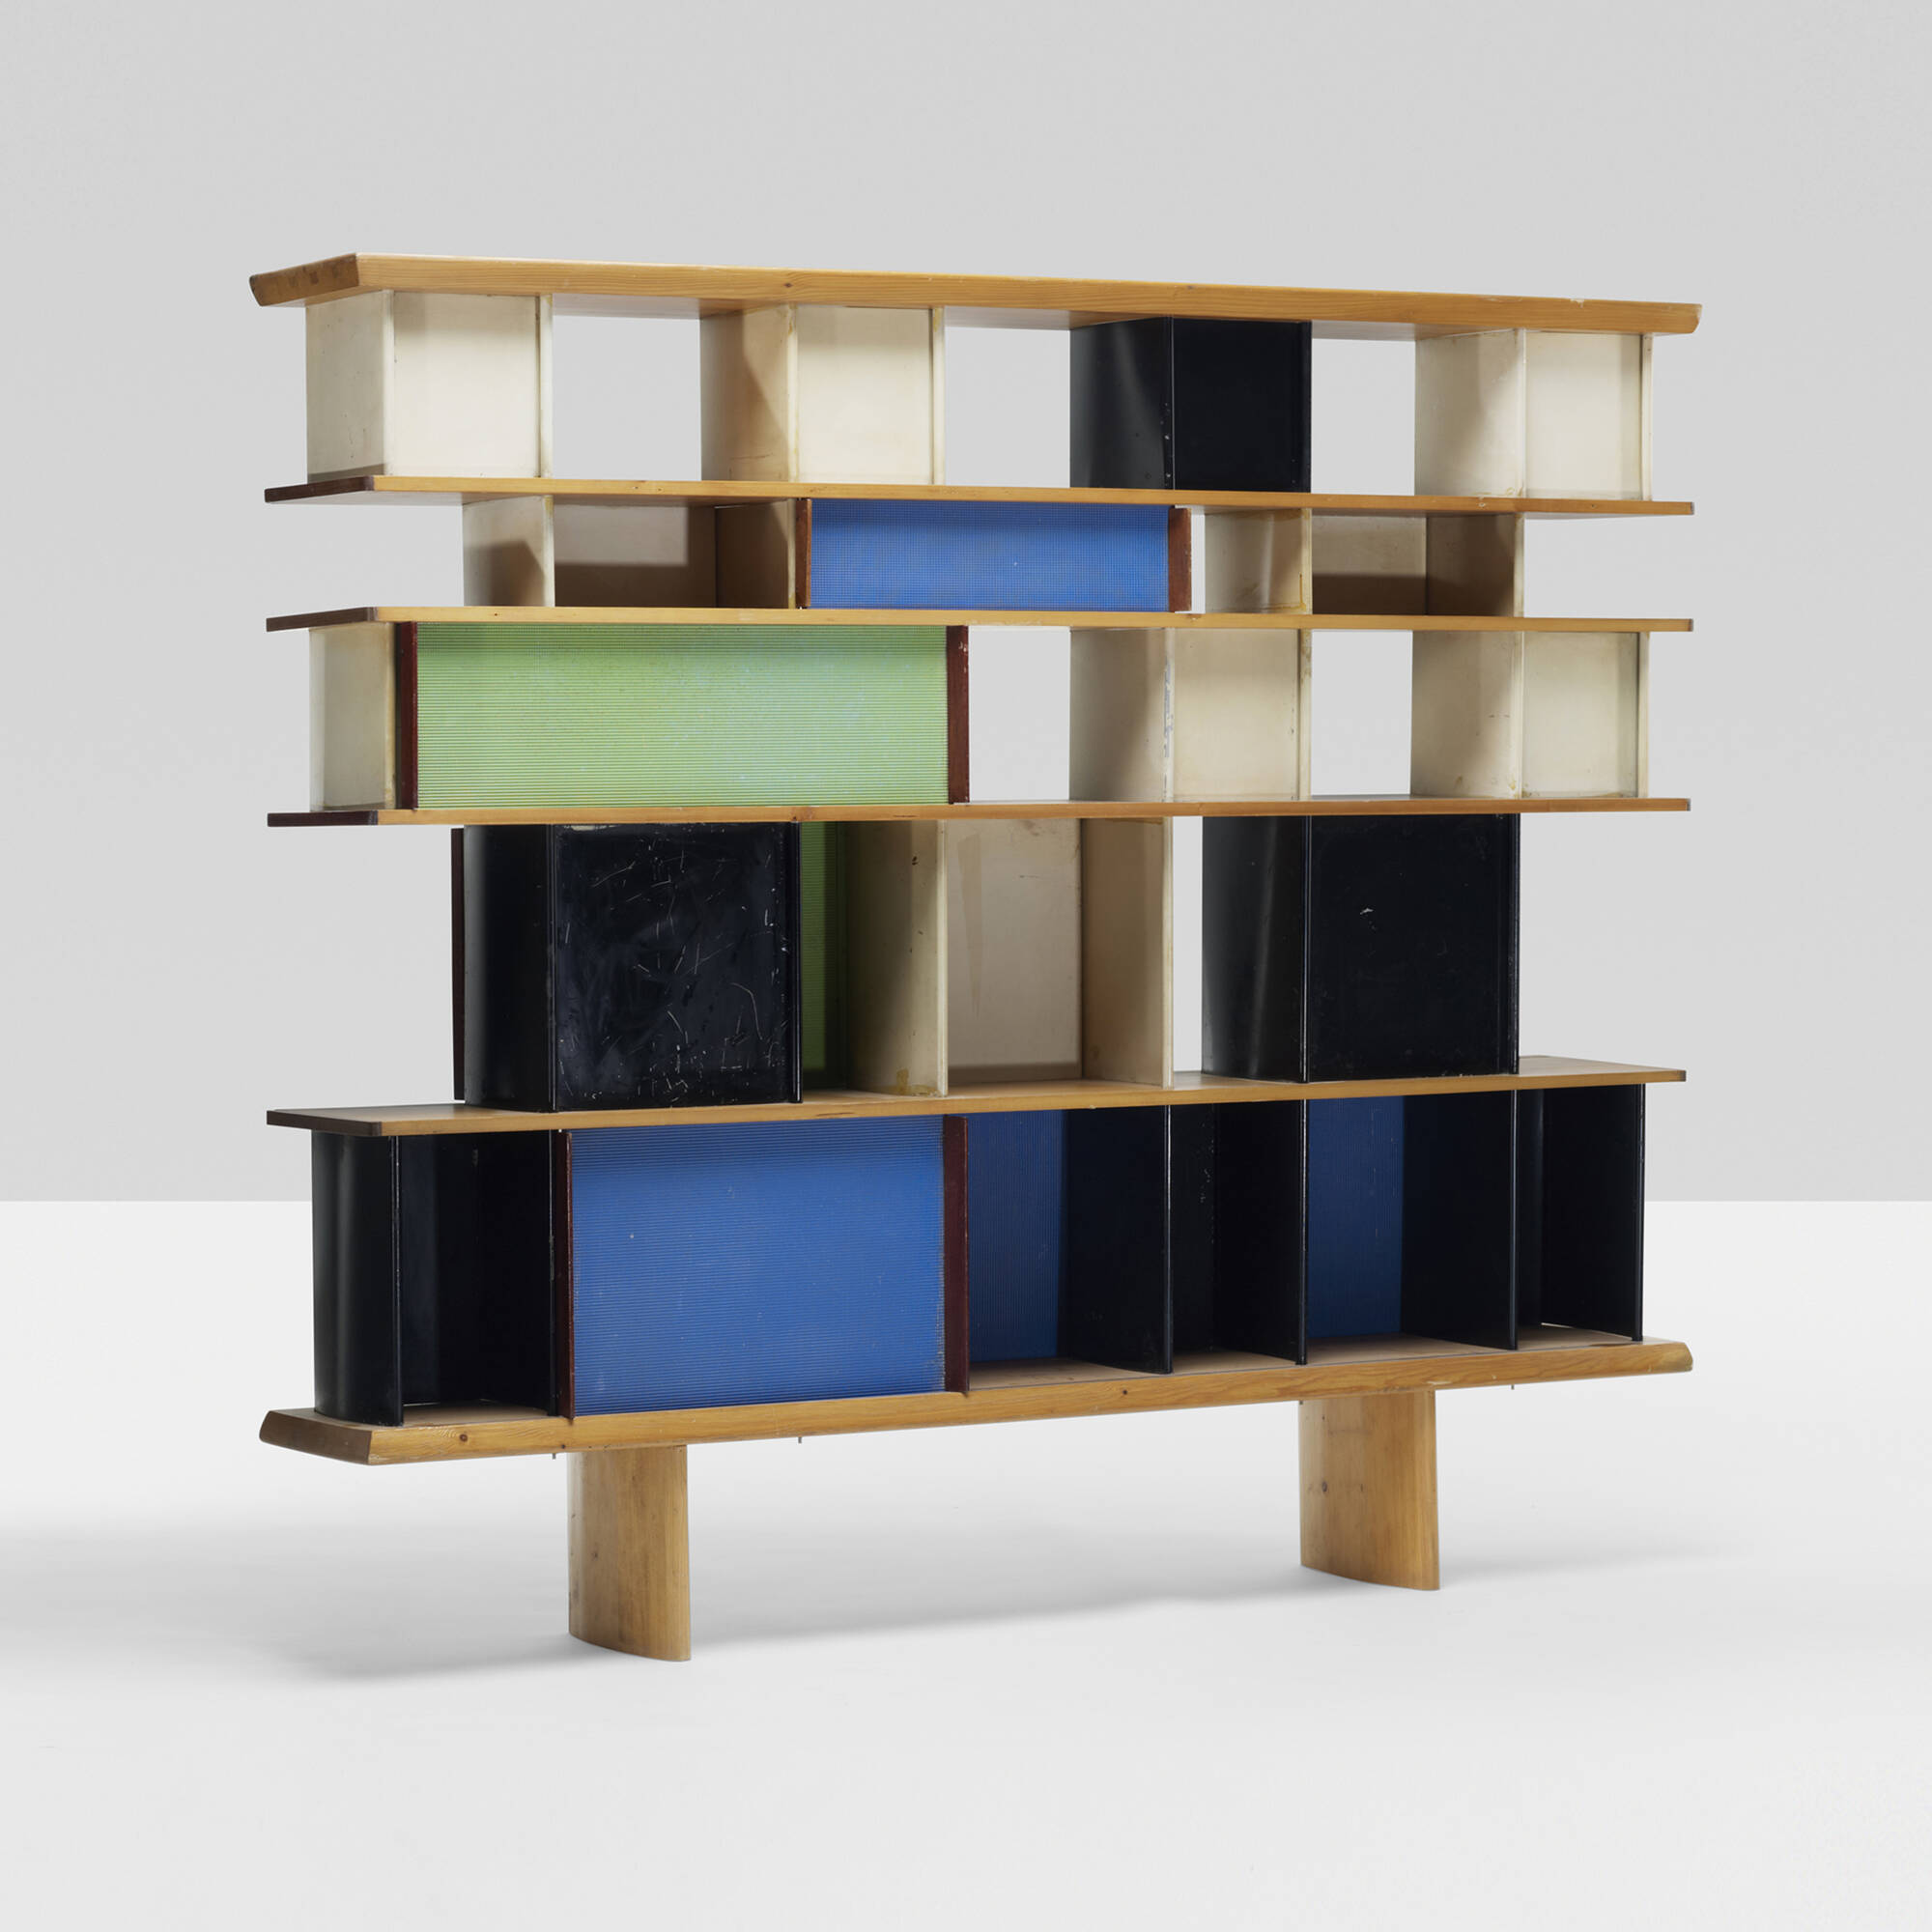 Sold at Auction: Charlotte Perriand, CHARLOTTE PERRIAND, LE